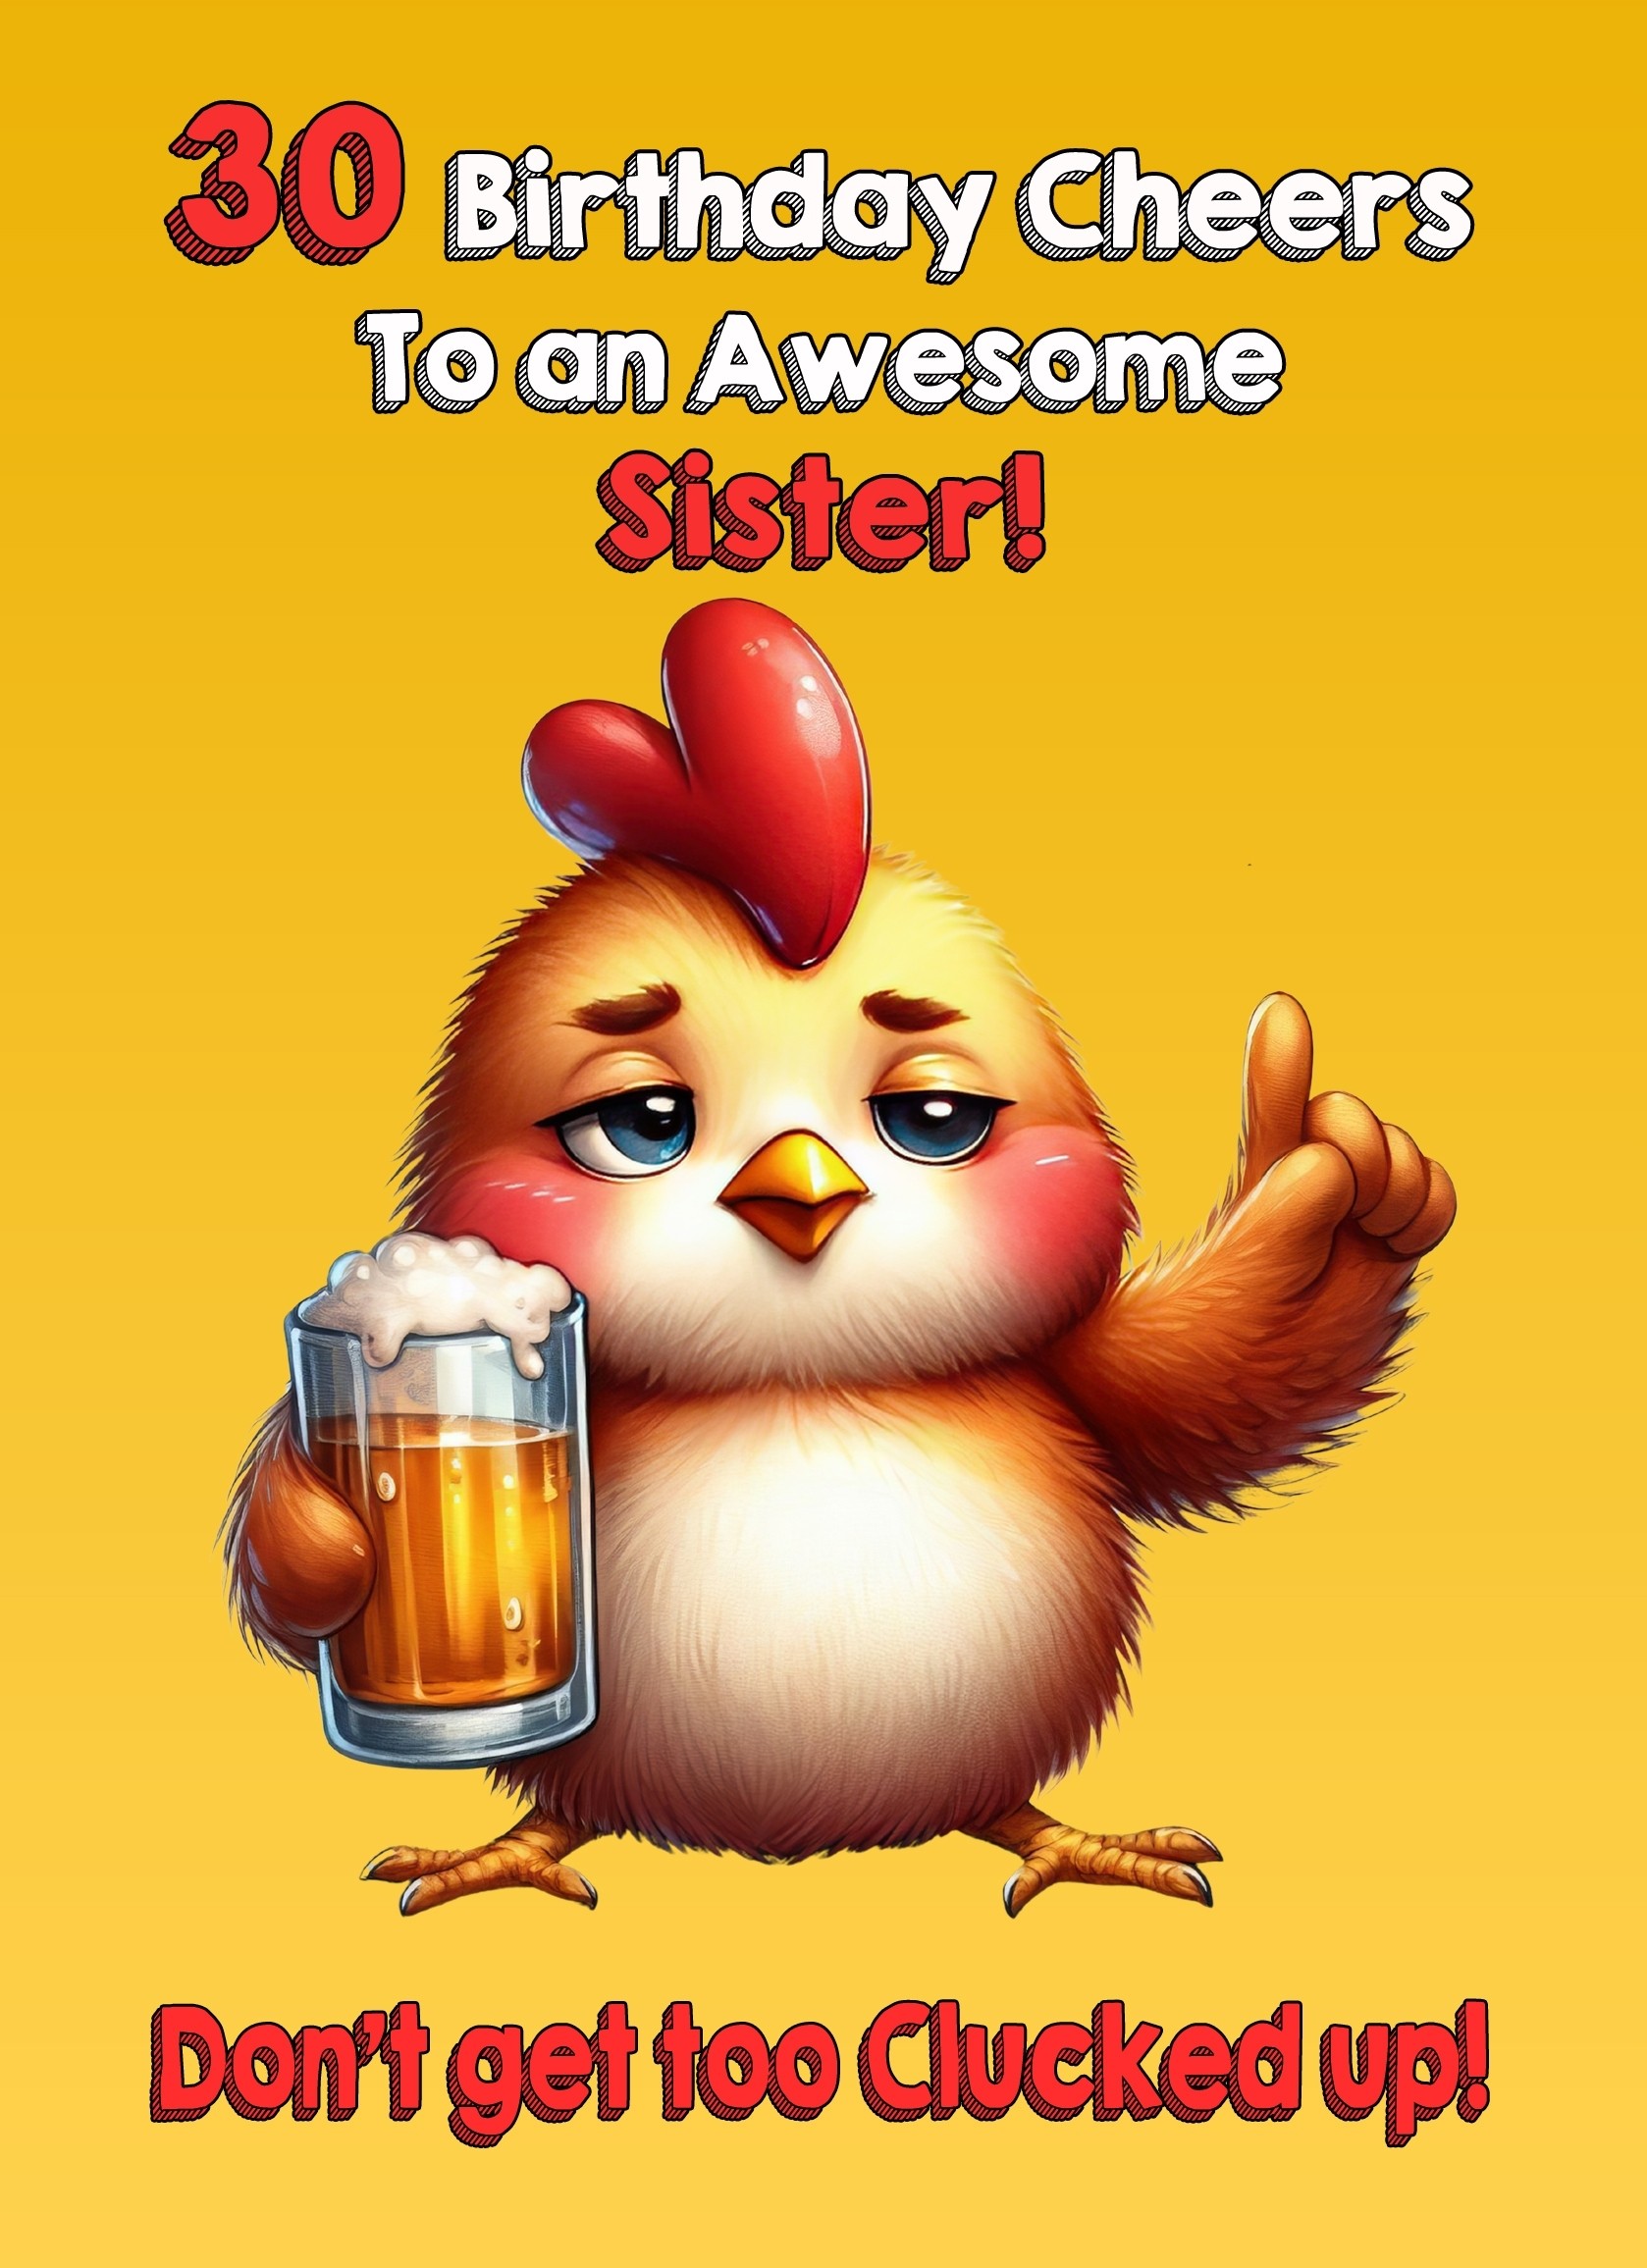 Sister 30th Birthday Card (Funny Beer Chicken Humour)